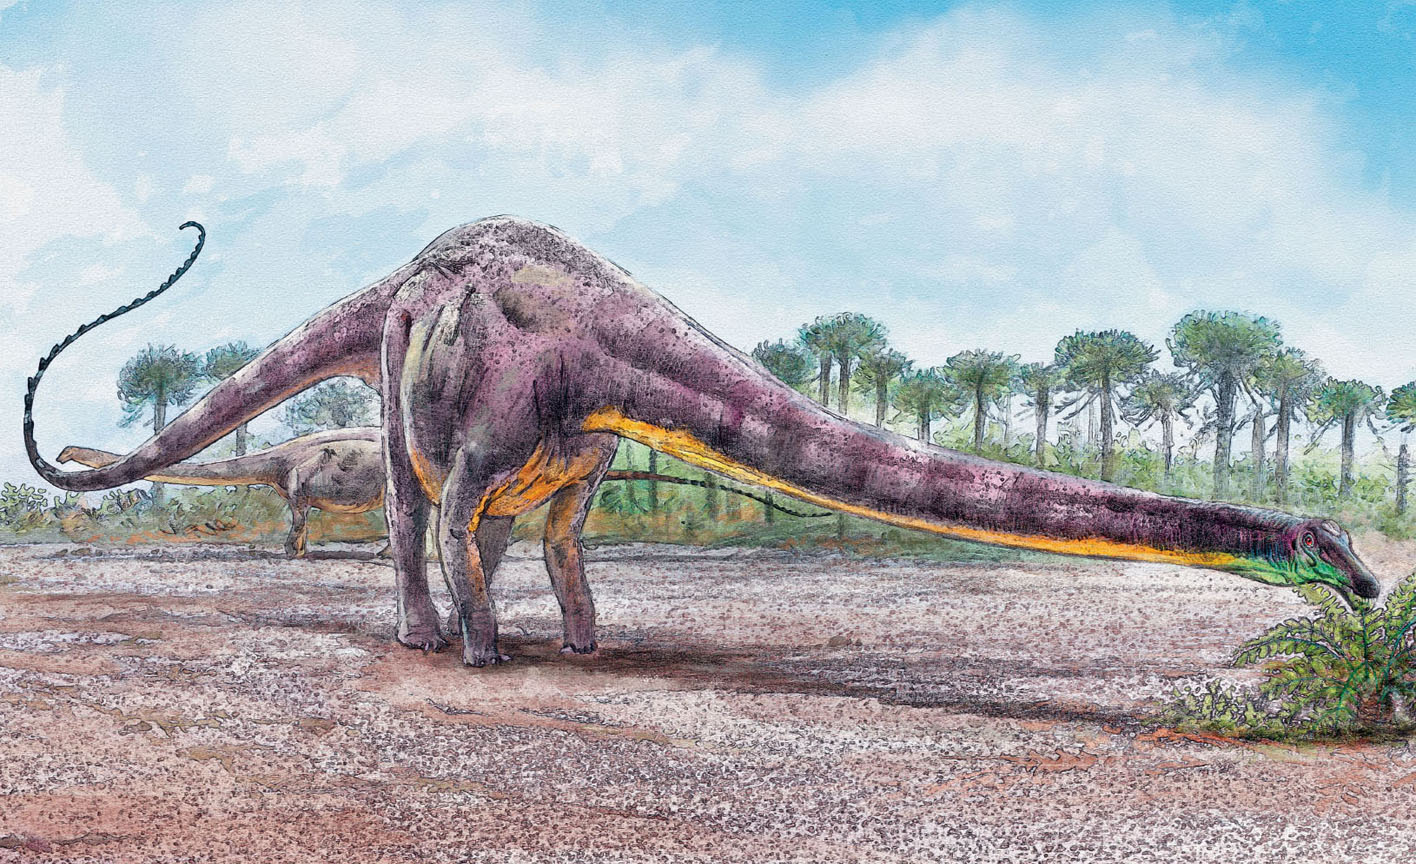 With its long neck Diplodocus could reach many plants without walking far - photo 4